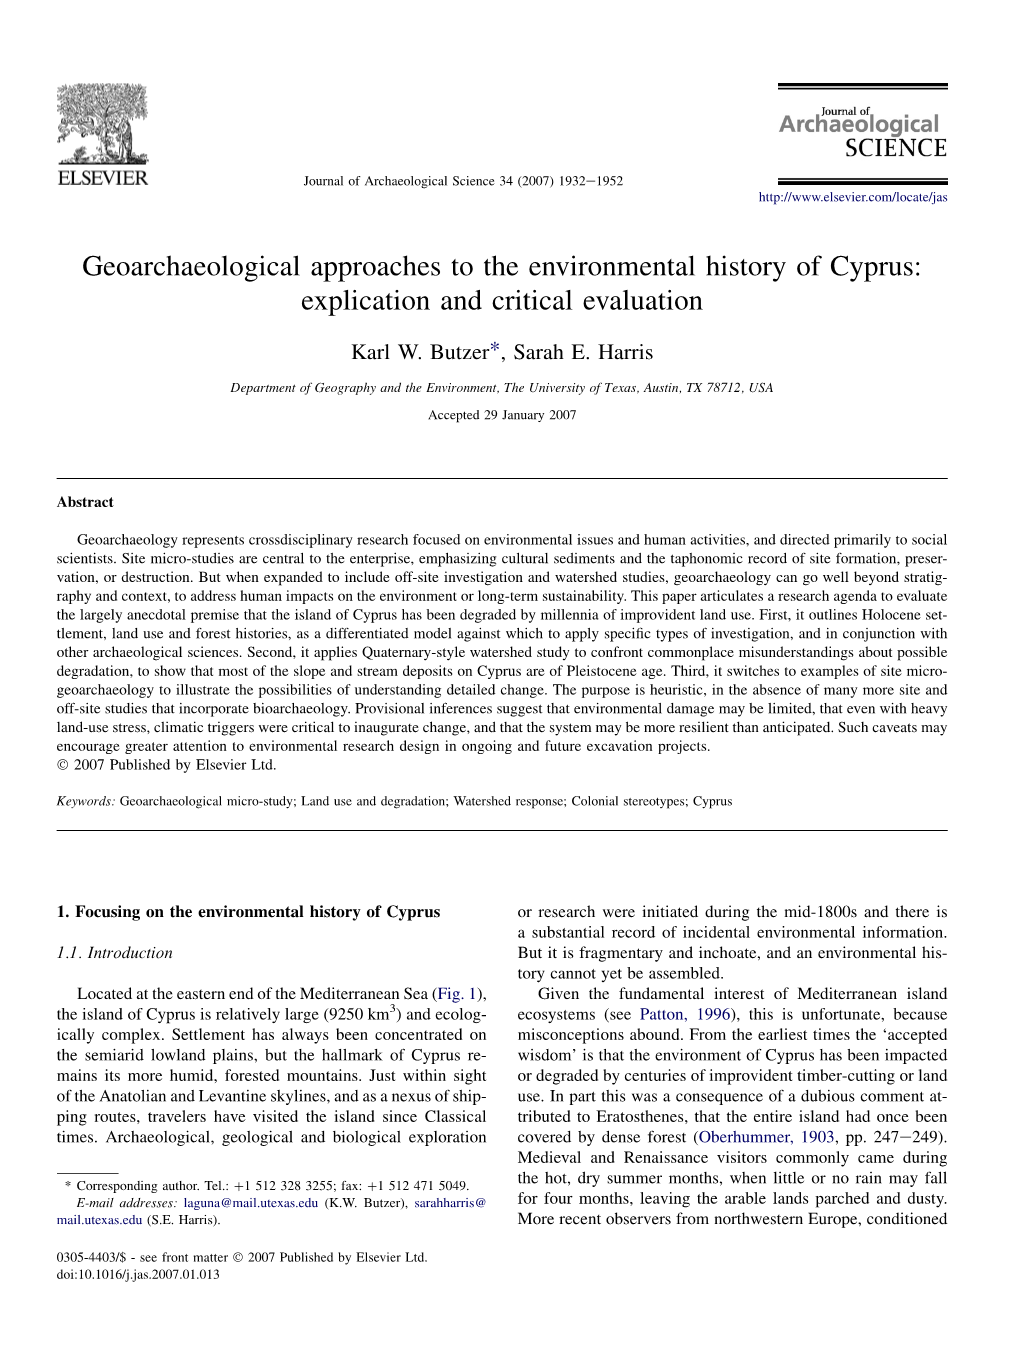 Geoarchaeological Approaches to the Environmental History of Cyprus: Explication and Critical Evaluation